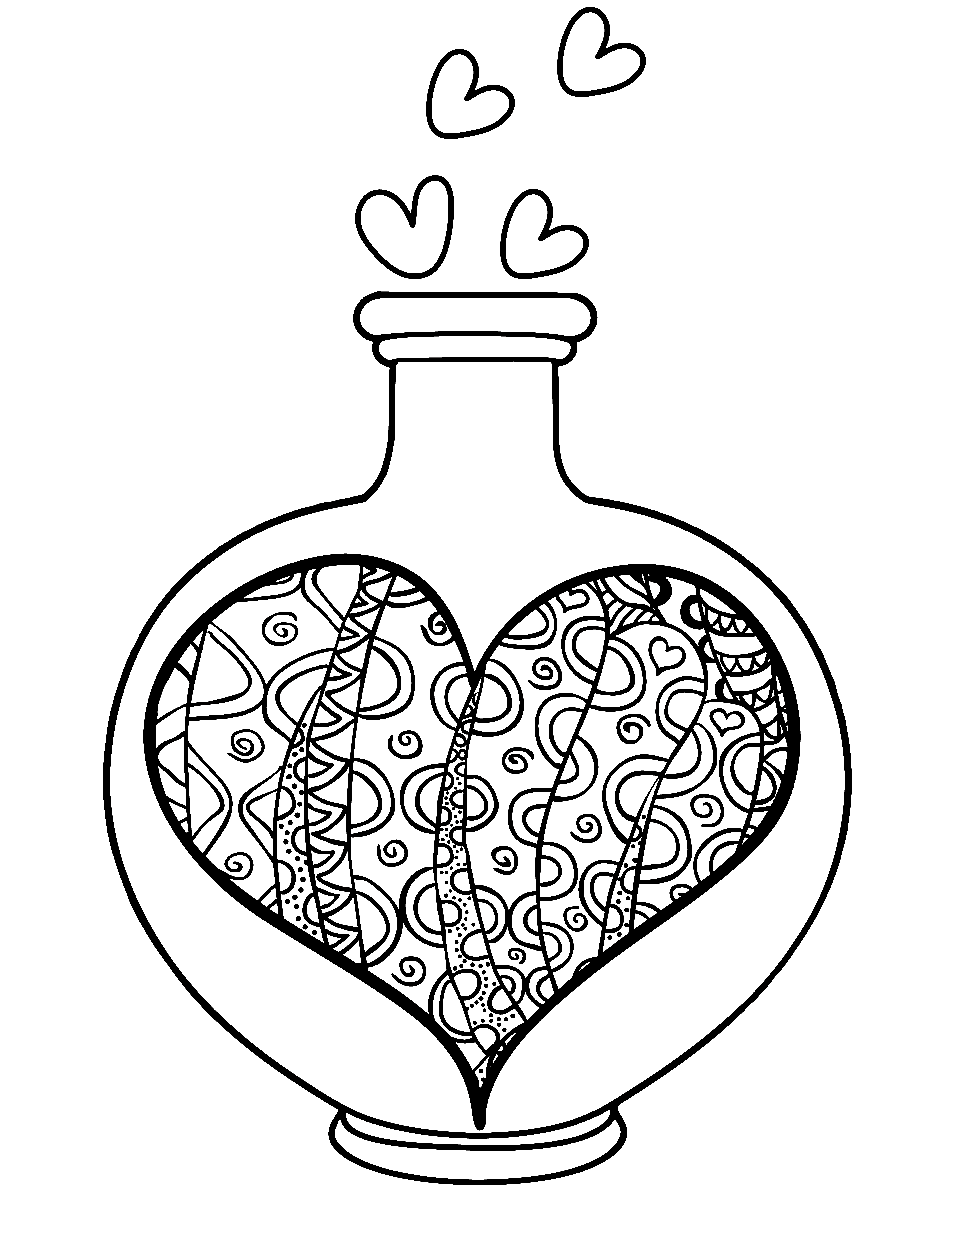 Love Potion Bottle Coloring Page - An intricately detailed Love Potion bottle with heart bubbles coming out.